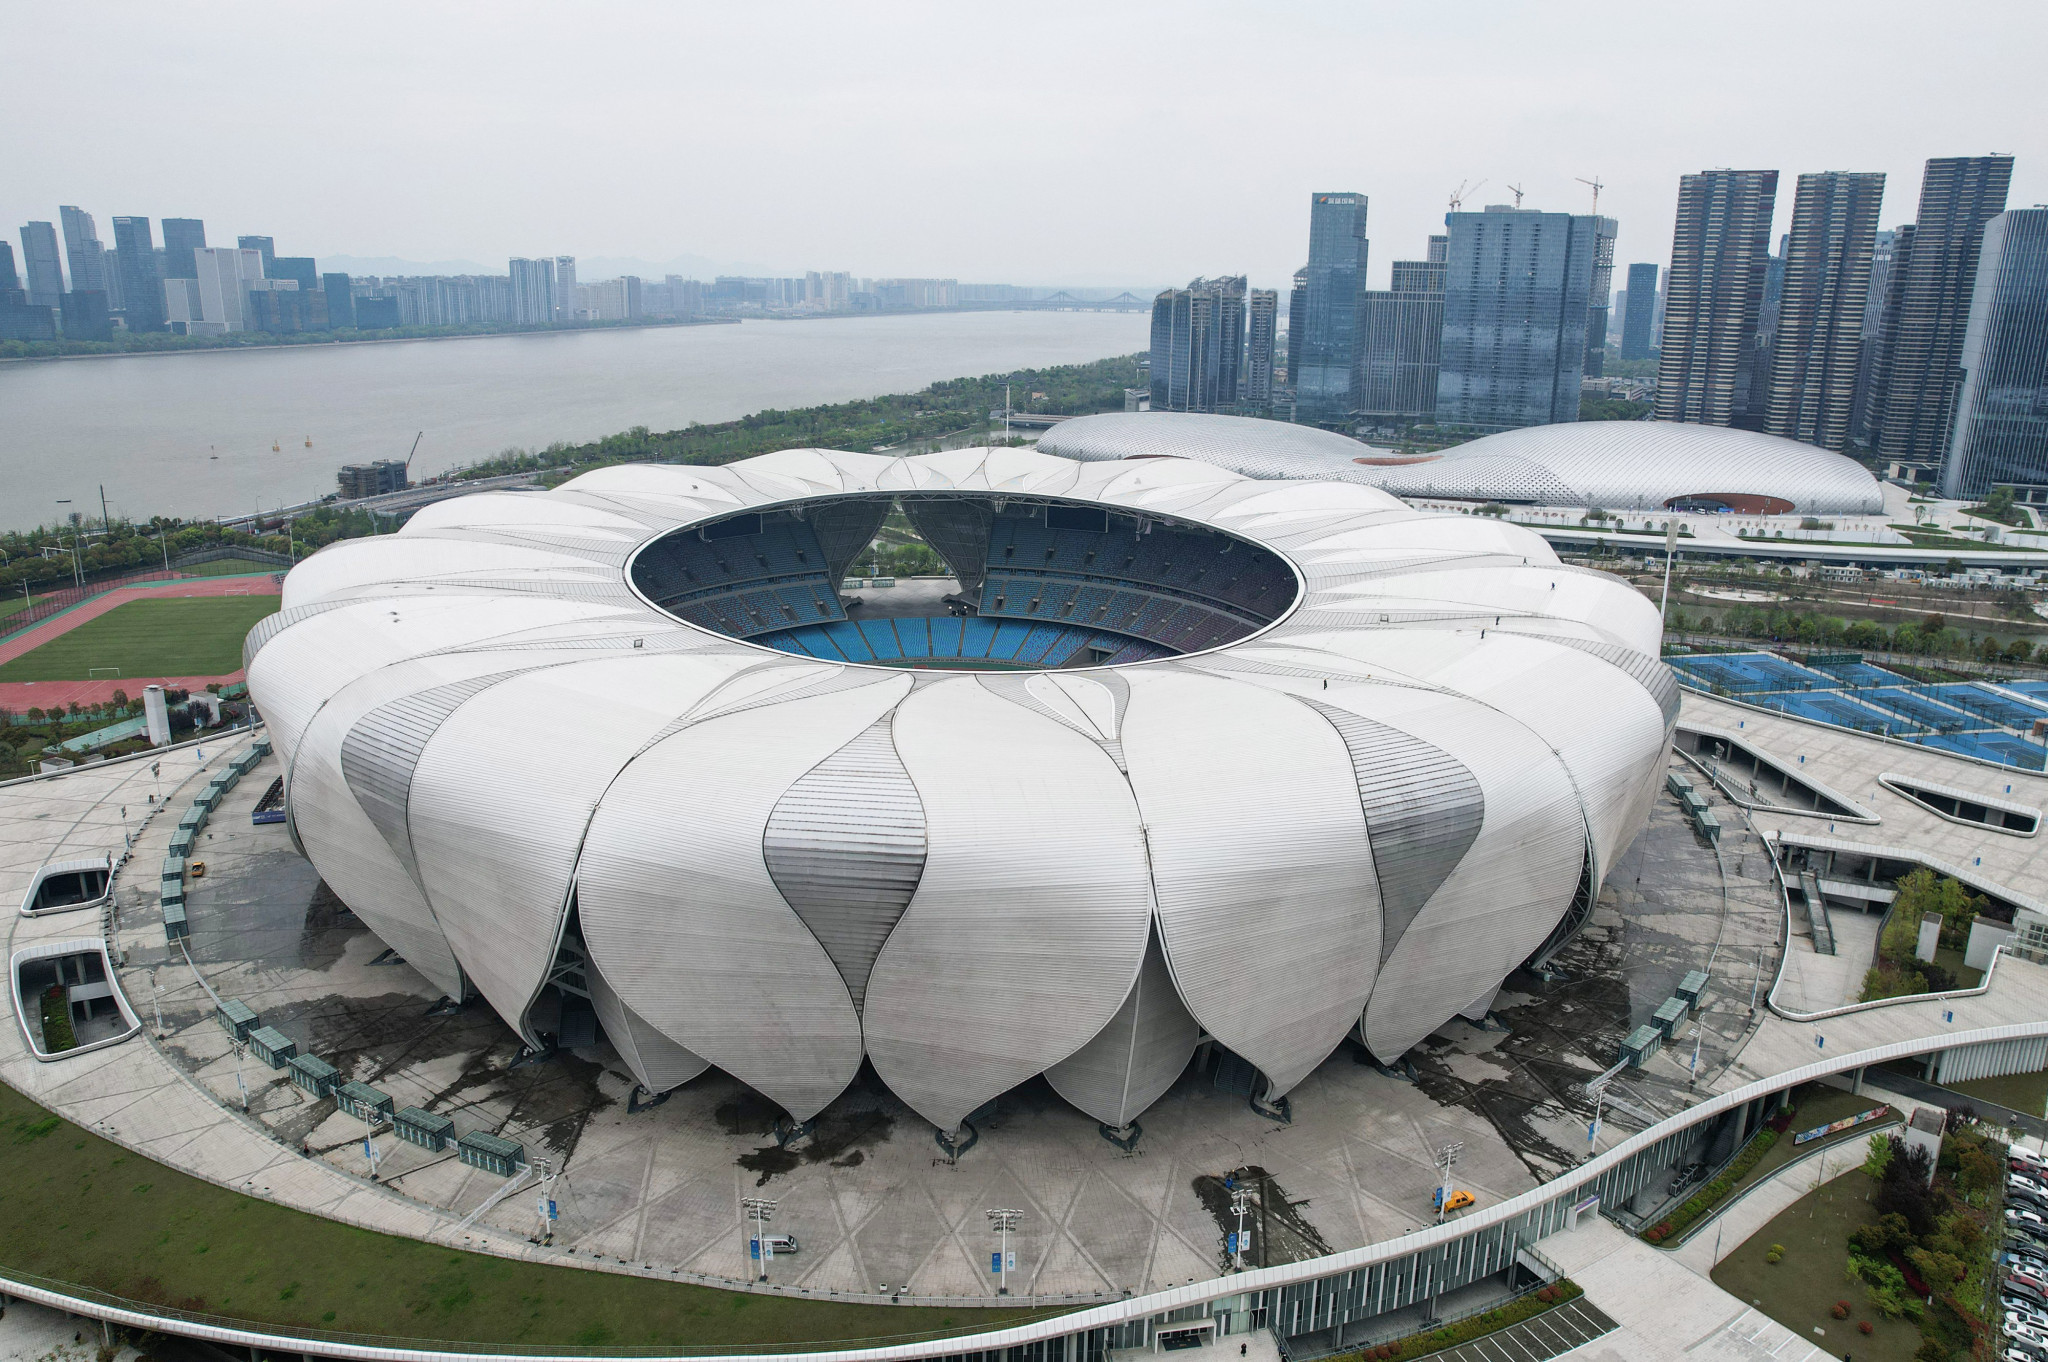 The "Big Lotus" stadium is amongst the Asian Games venues set for public opening in July ©Getty Images